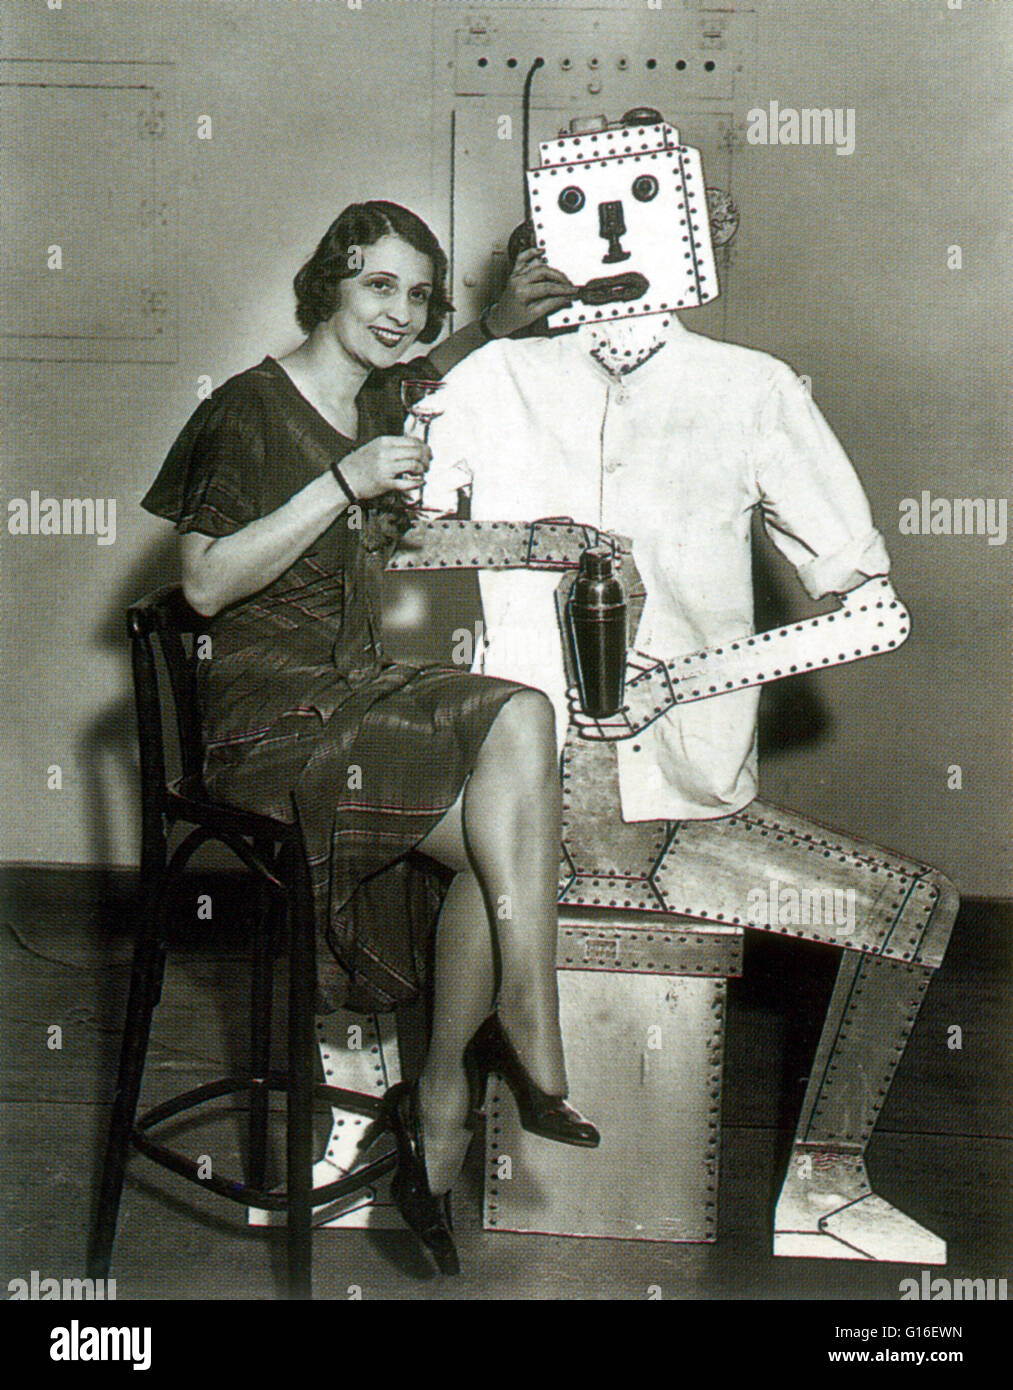 A young bar maid met the future. A cocktail robot at a bartender's school in New York, 1933. The term 'robot' was first used to denote fictional automata in a 1921 play R.U.R. by the Czech writer, Karel Capek.  In 1928, one of the first humanoid robots wa Stock Photo